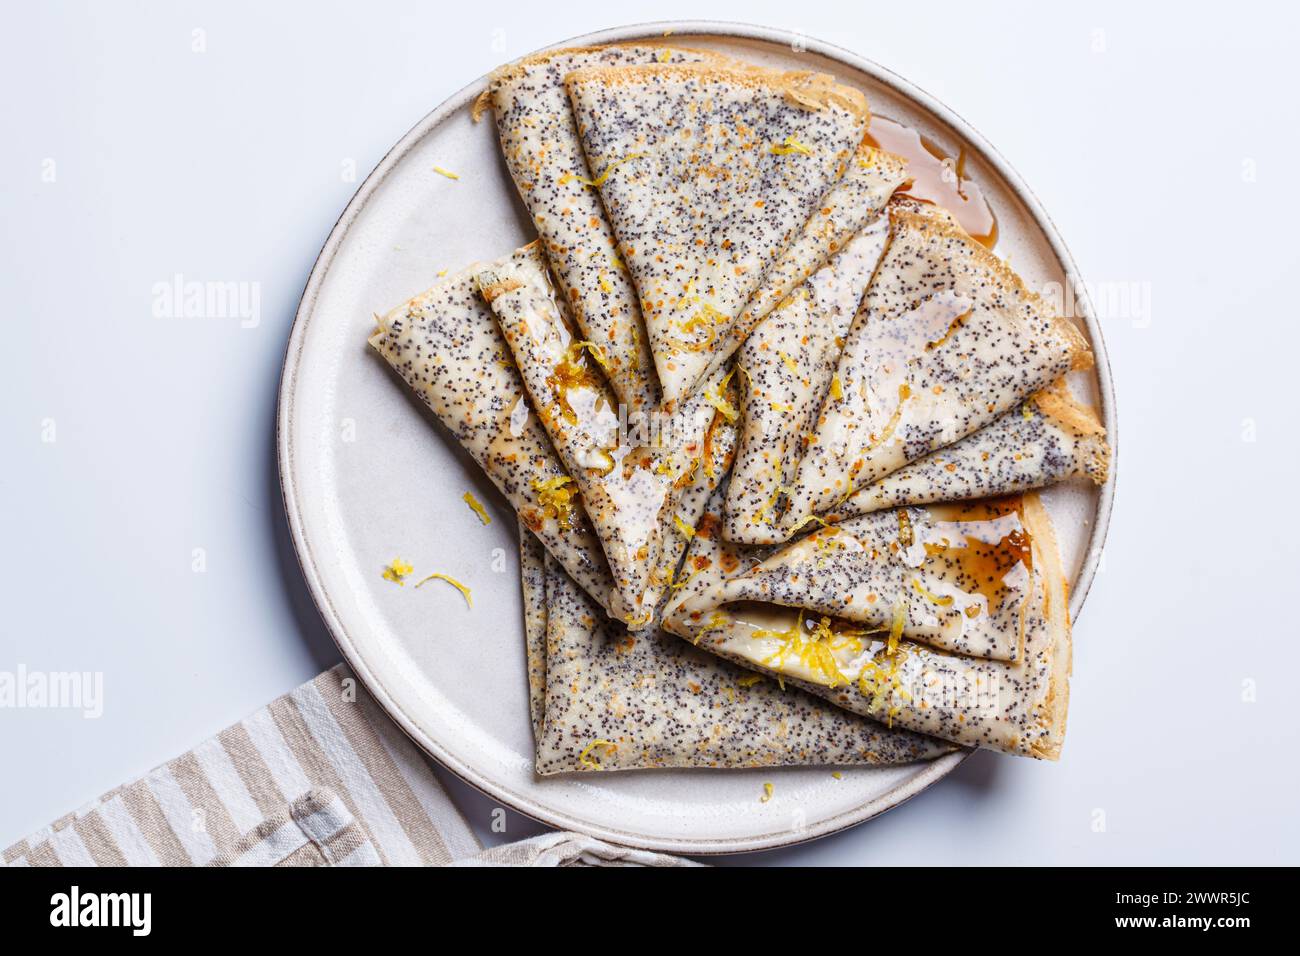 Crepes with poppy seeds, maple syrup and zest. Russian maslenitsa pancakes recipe. Stock Photo